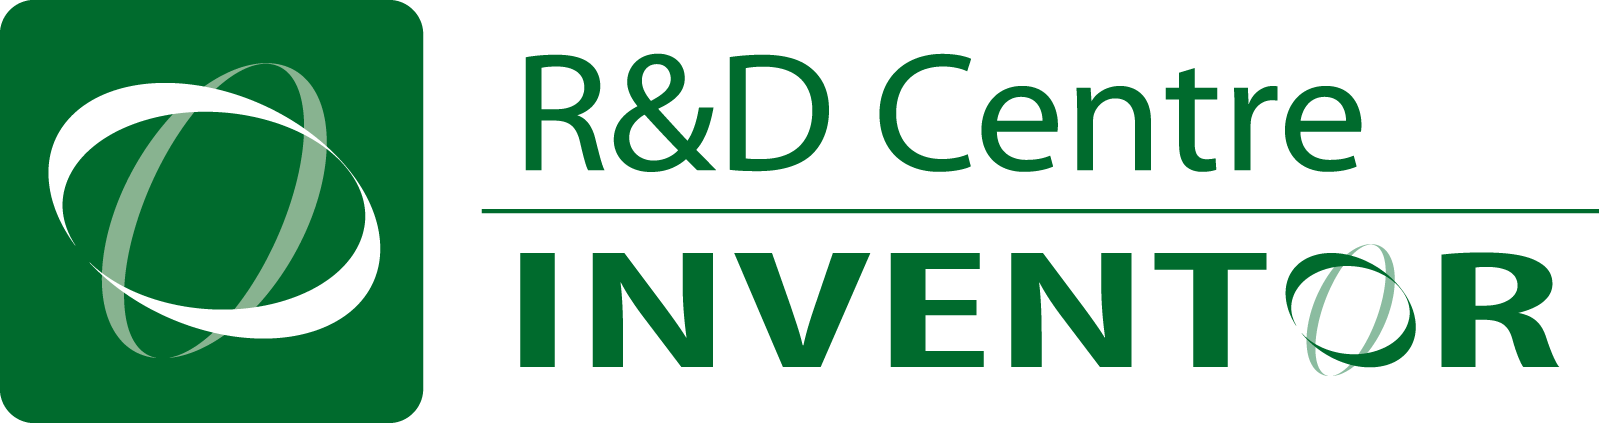 logo_rd_centre_inventor.png